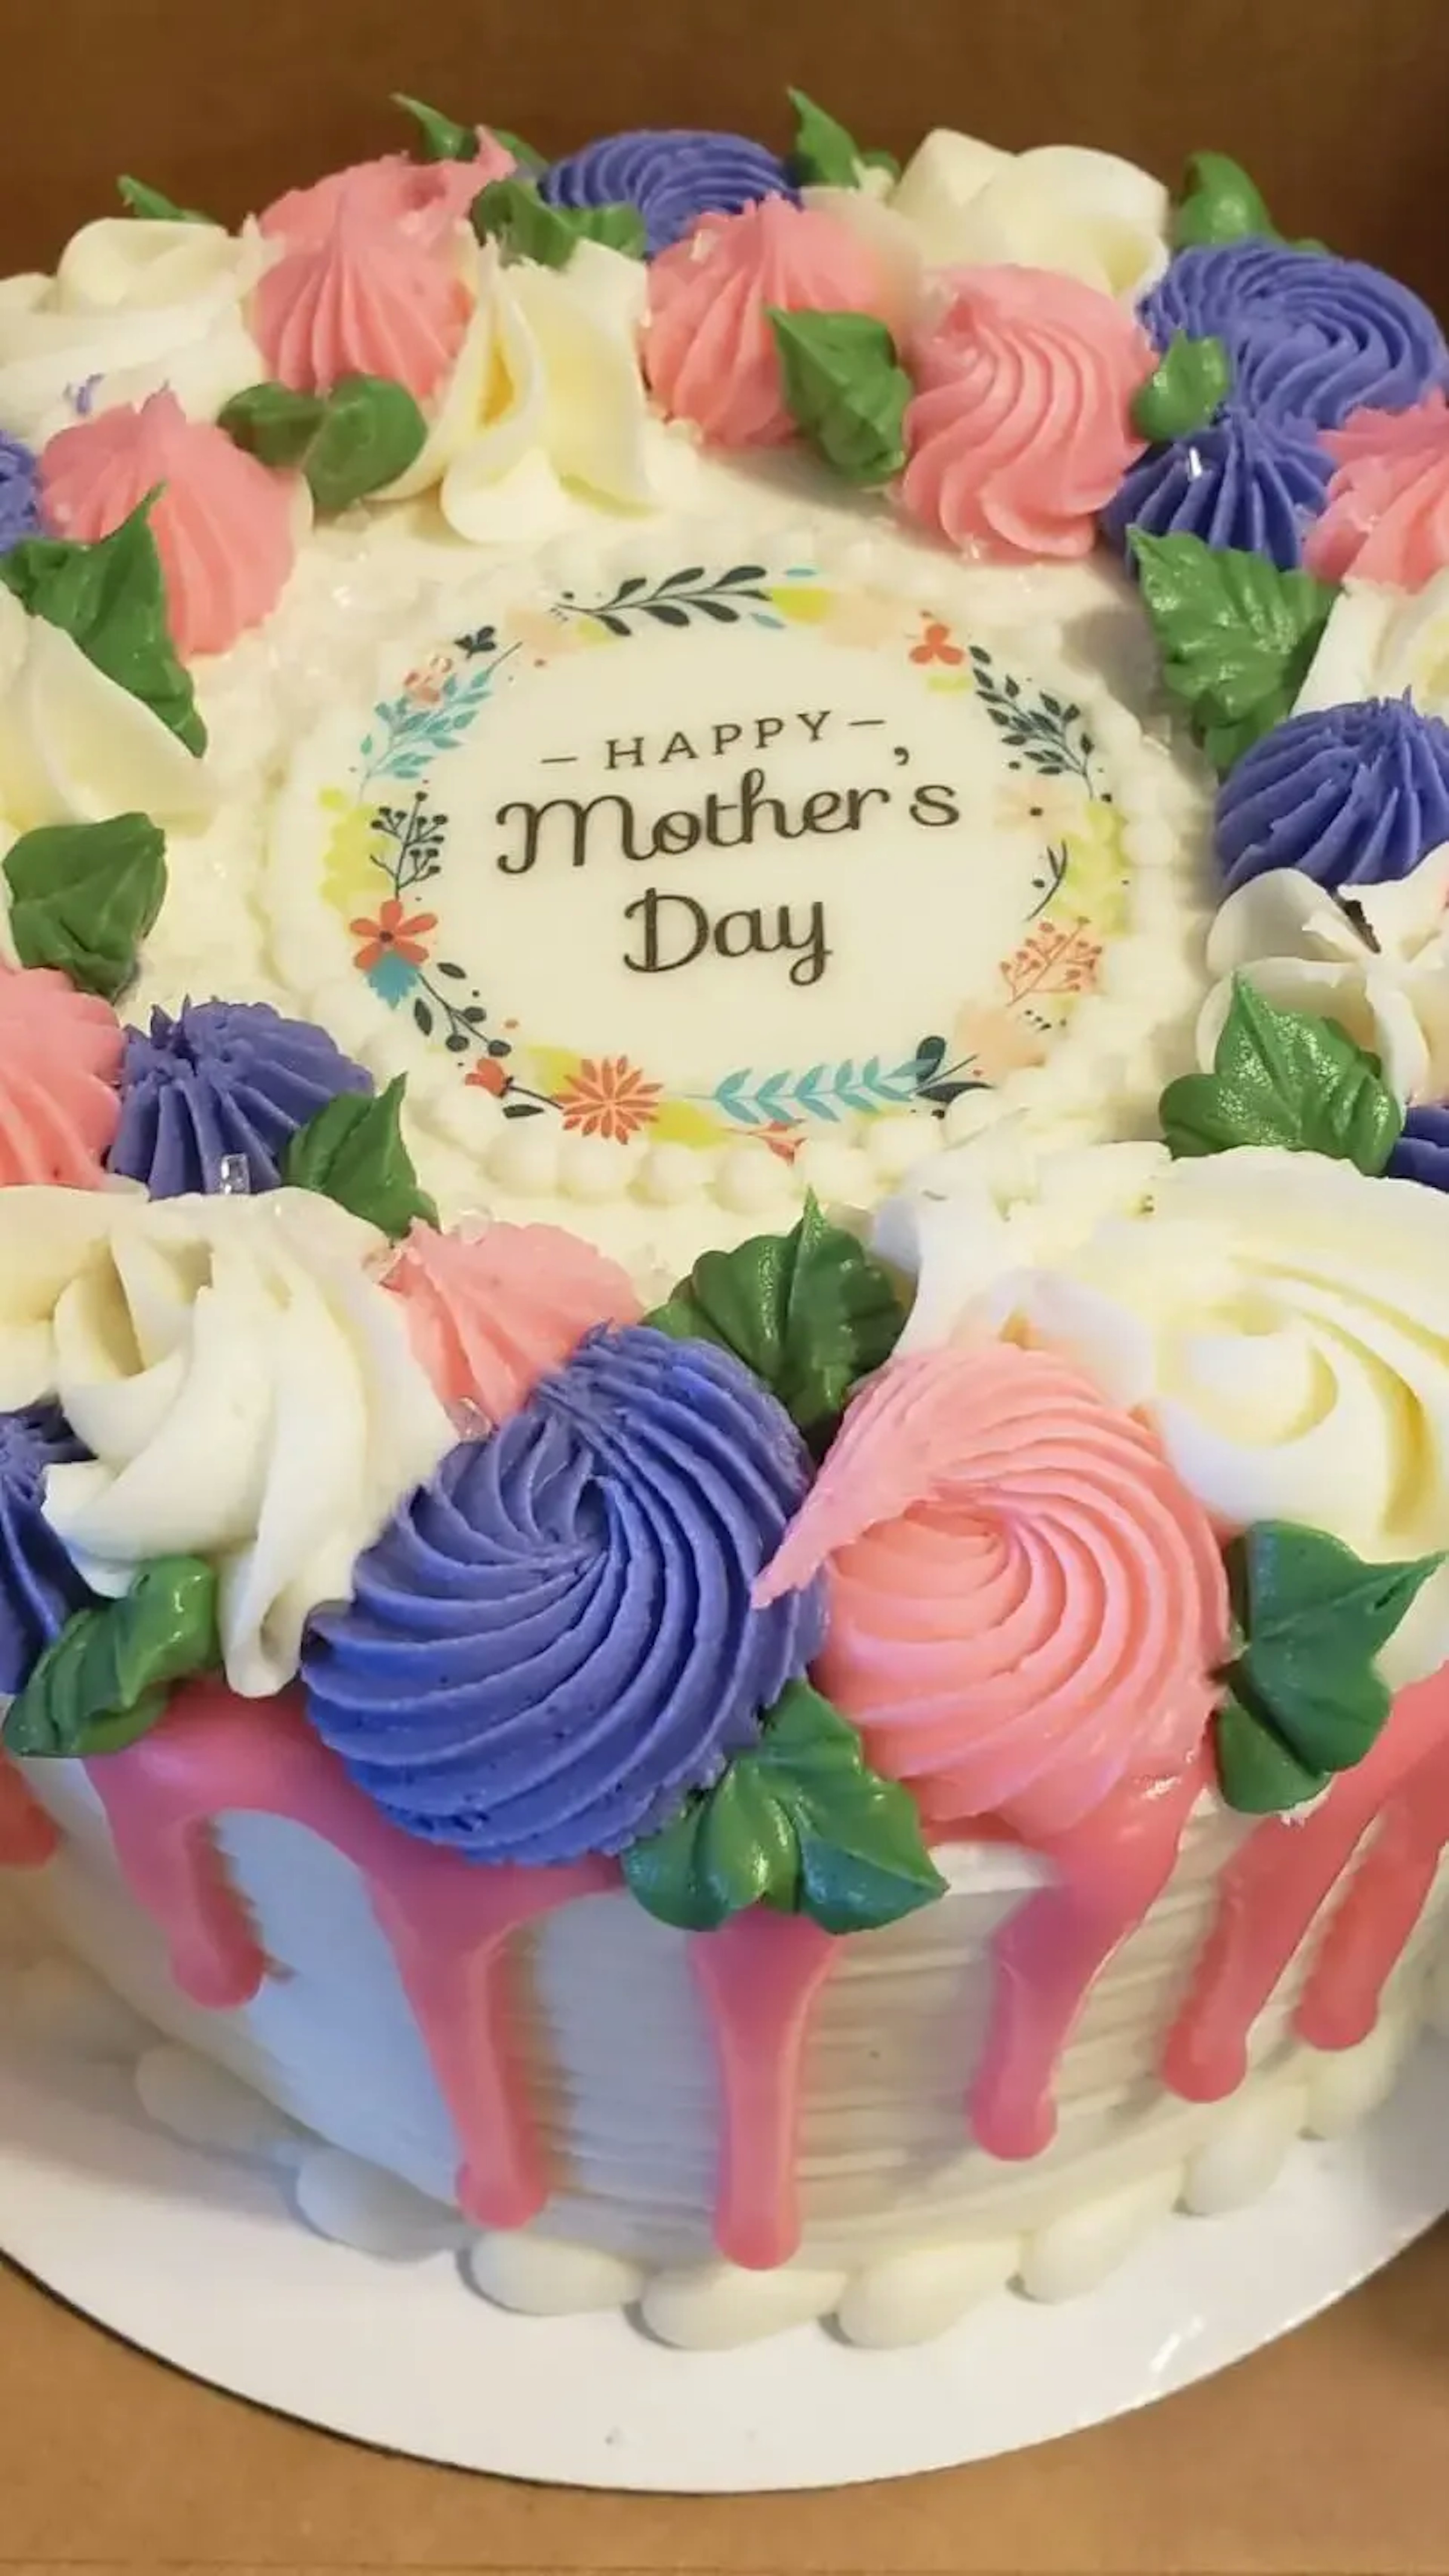 A festive Mother's Day cake deocarted with multi-color flowers.